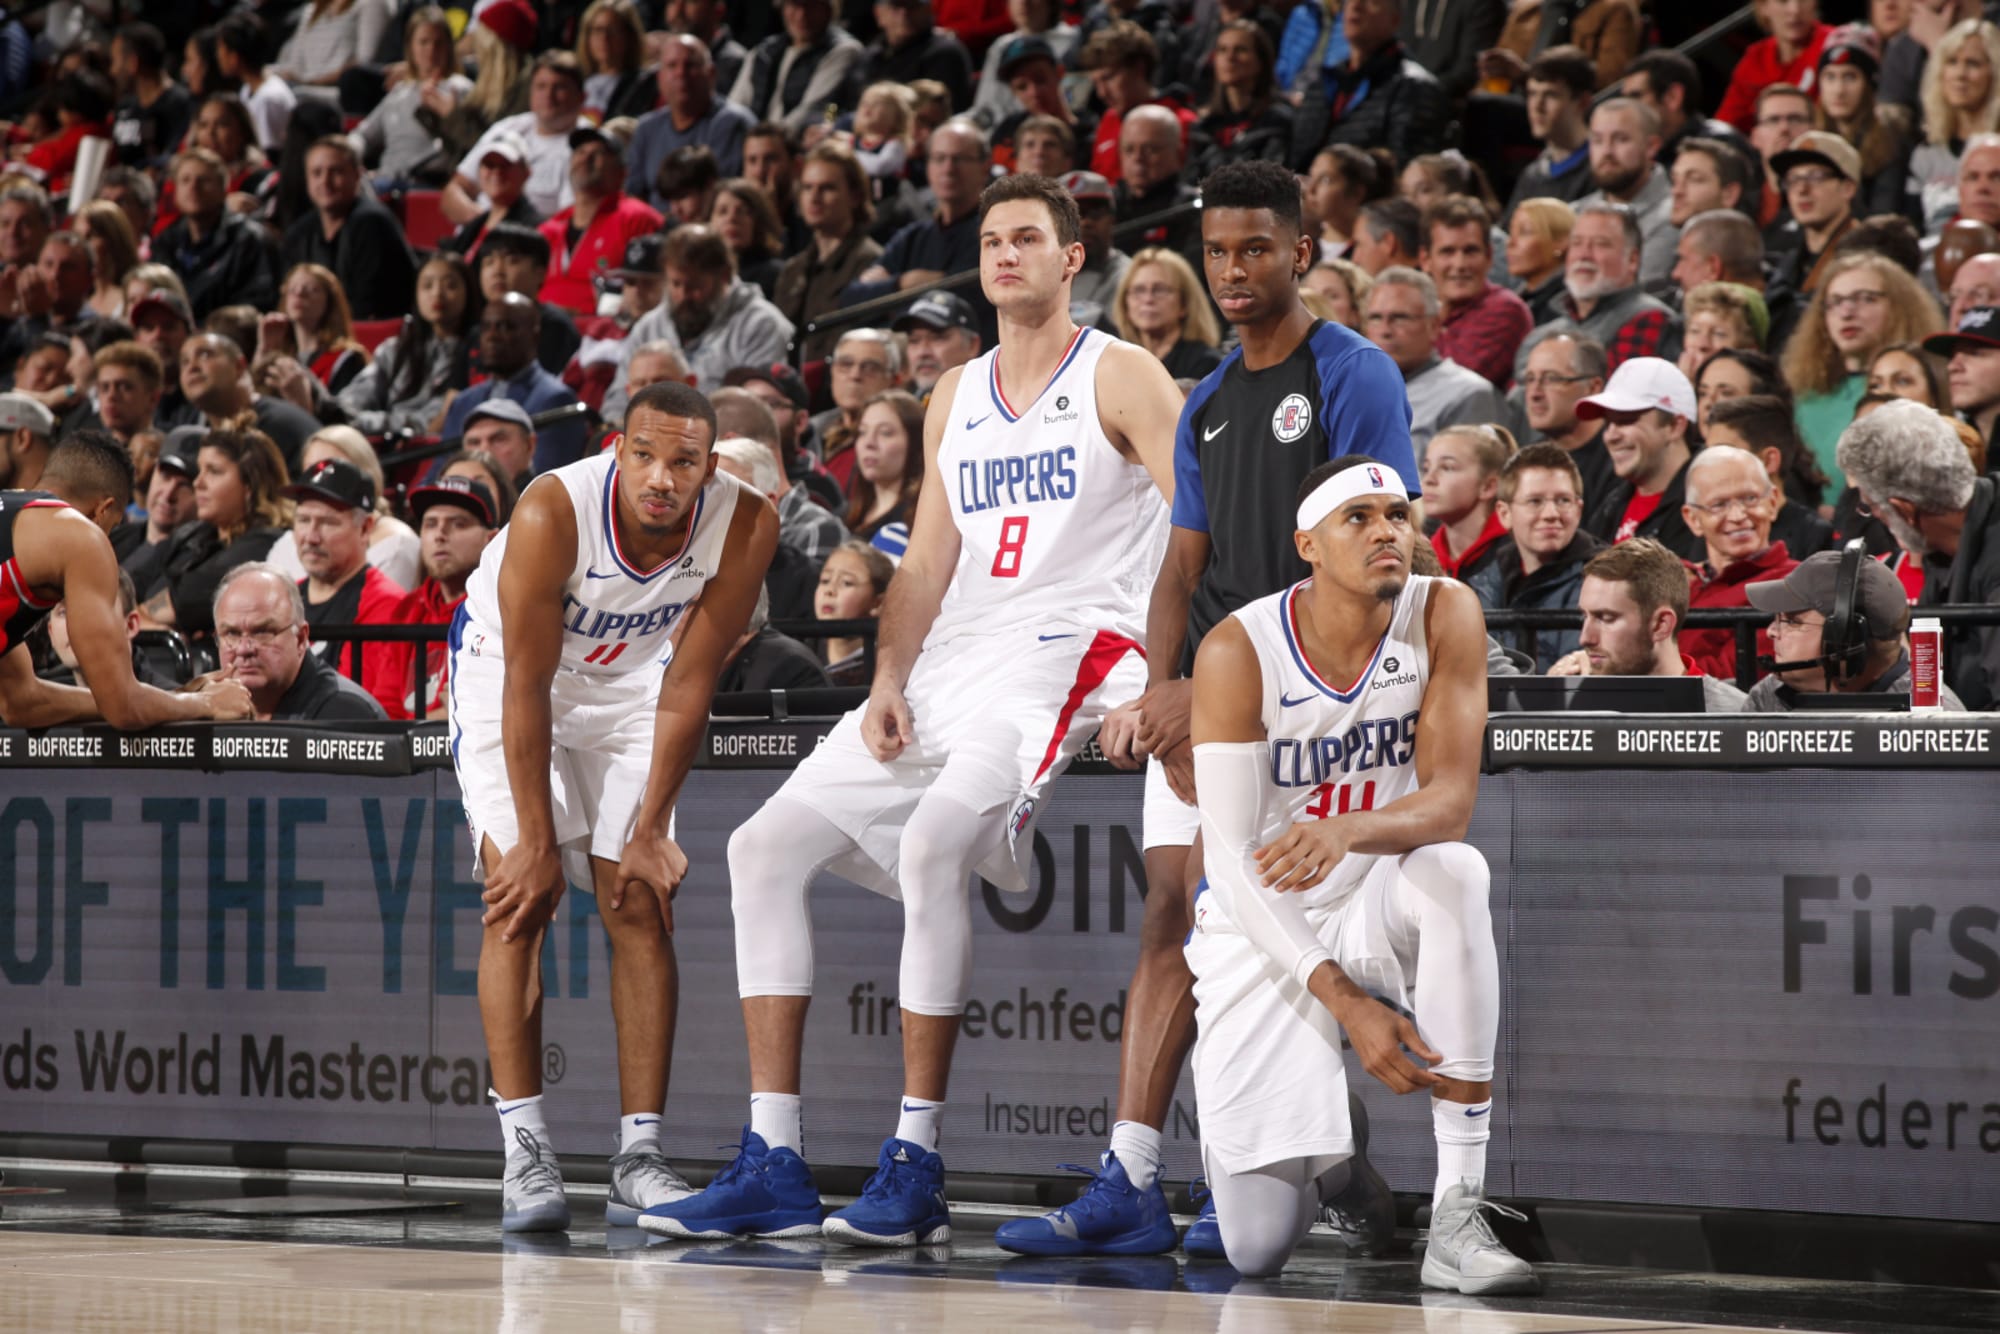 The LA Clippers have the best lineup in the NBA through 23 games